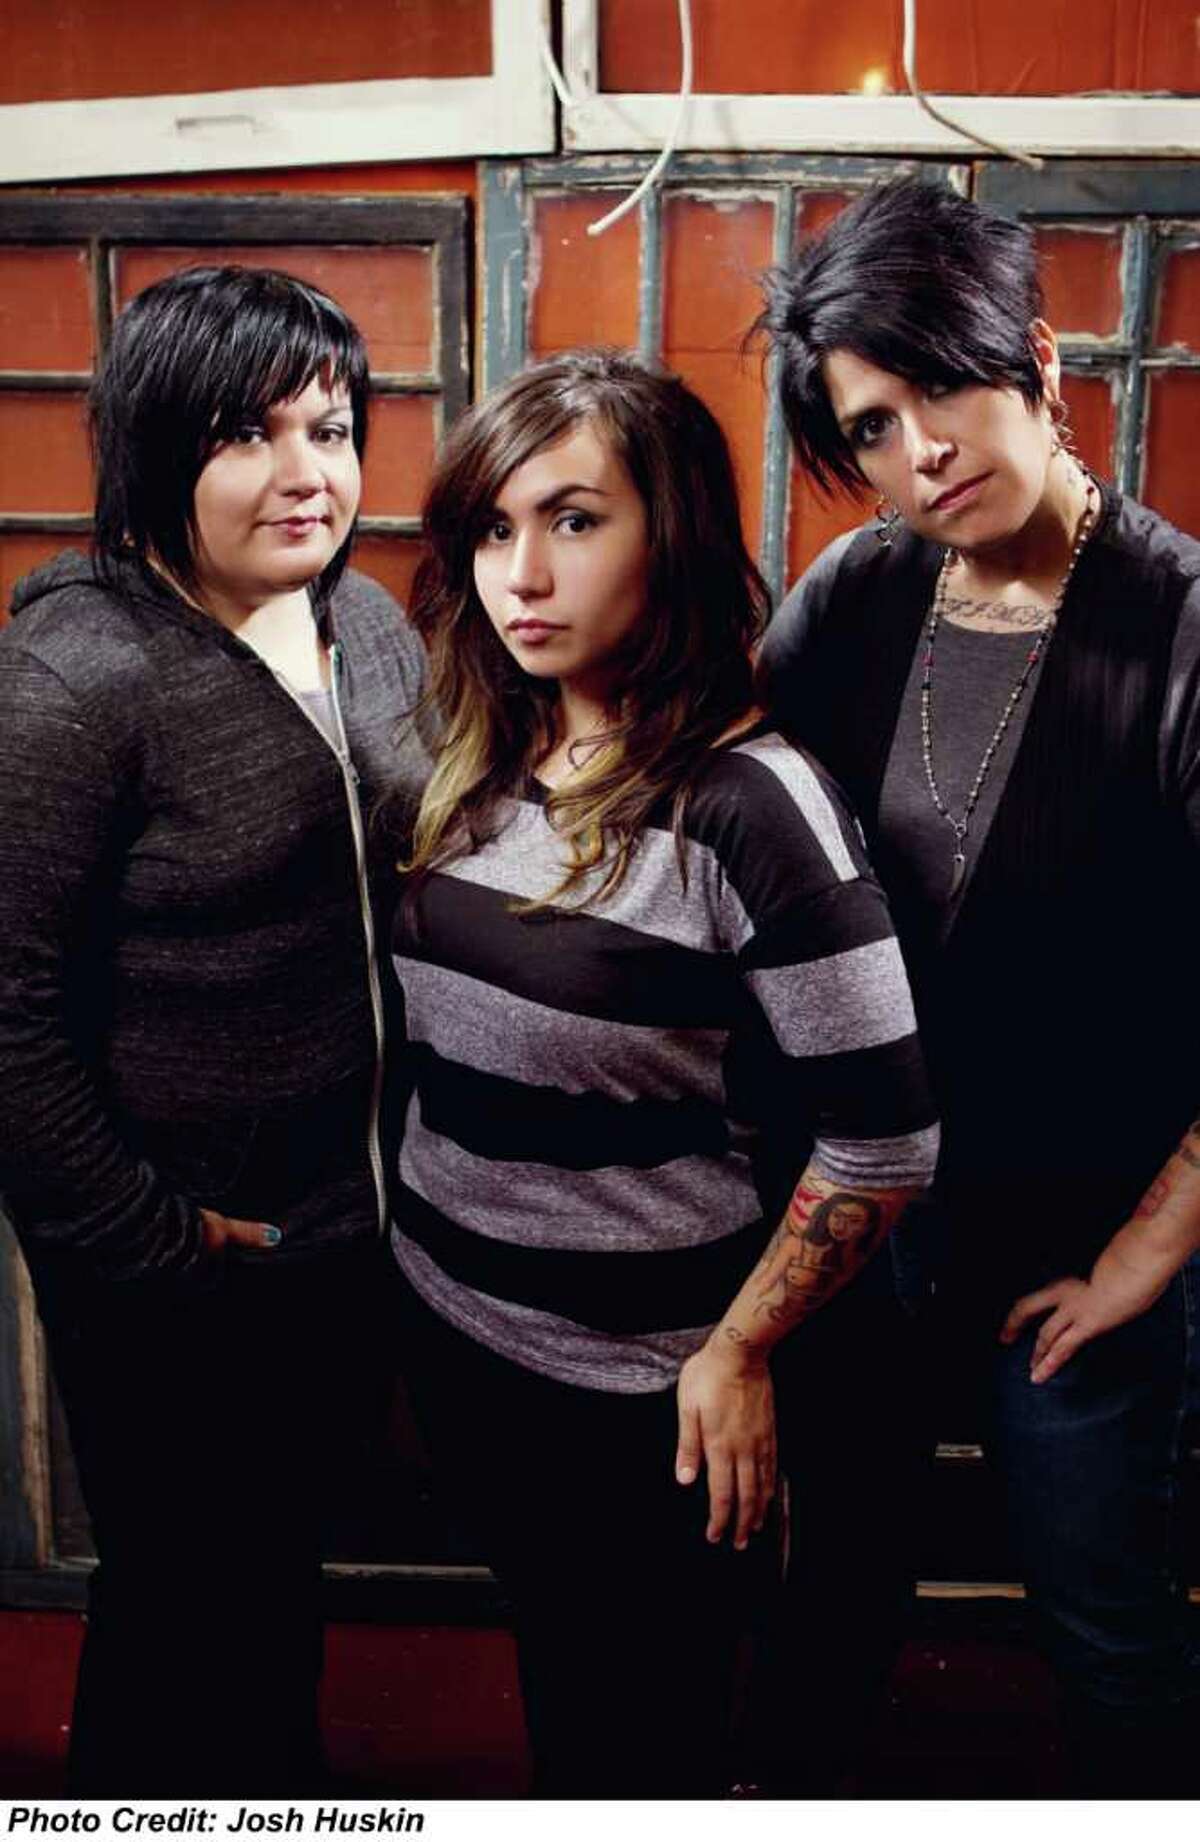 Josh Huskin GIRL IN A COMA: The San Antonio-based rock trio of Phanie Diaz, from left, Nina Diaz and Jenn Alva released Exits & All the Rest.